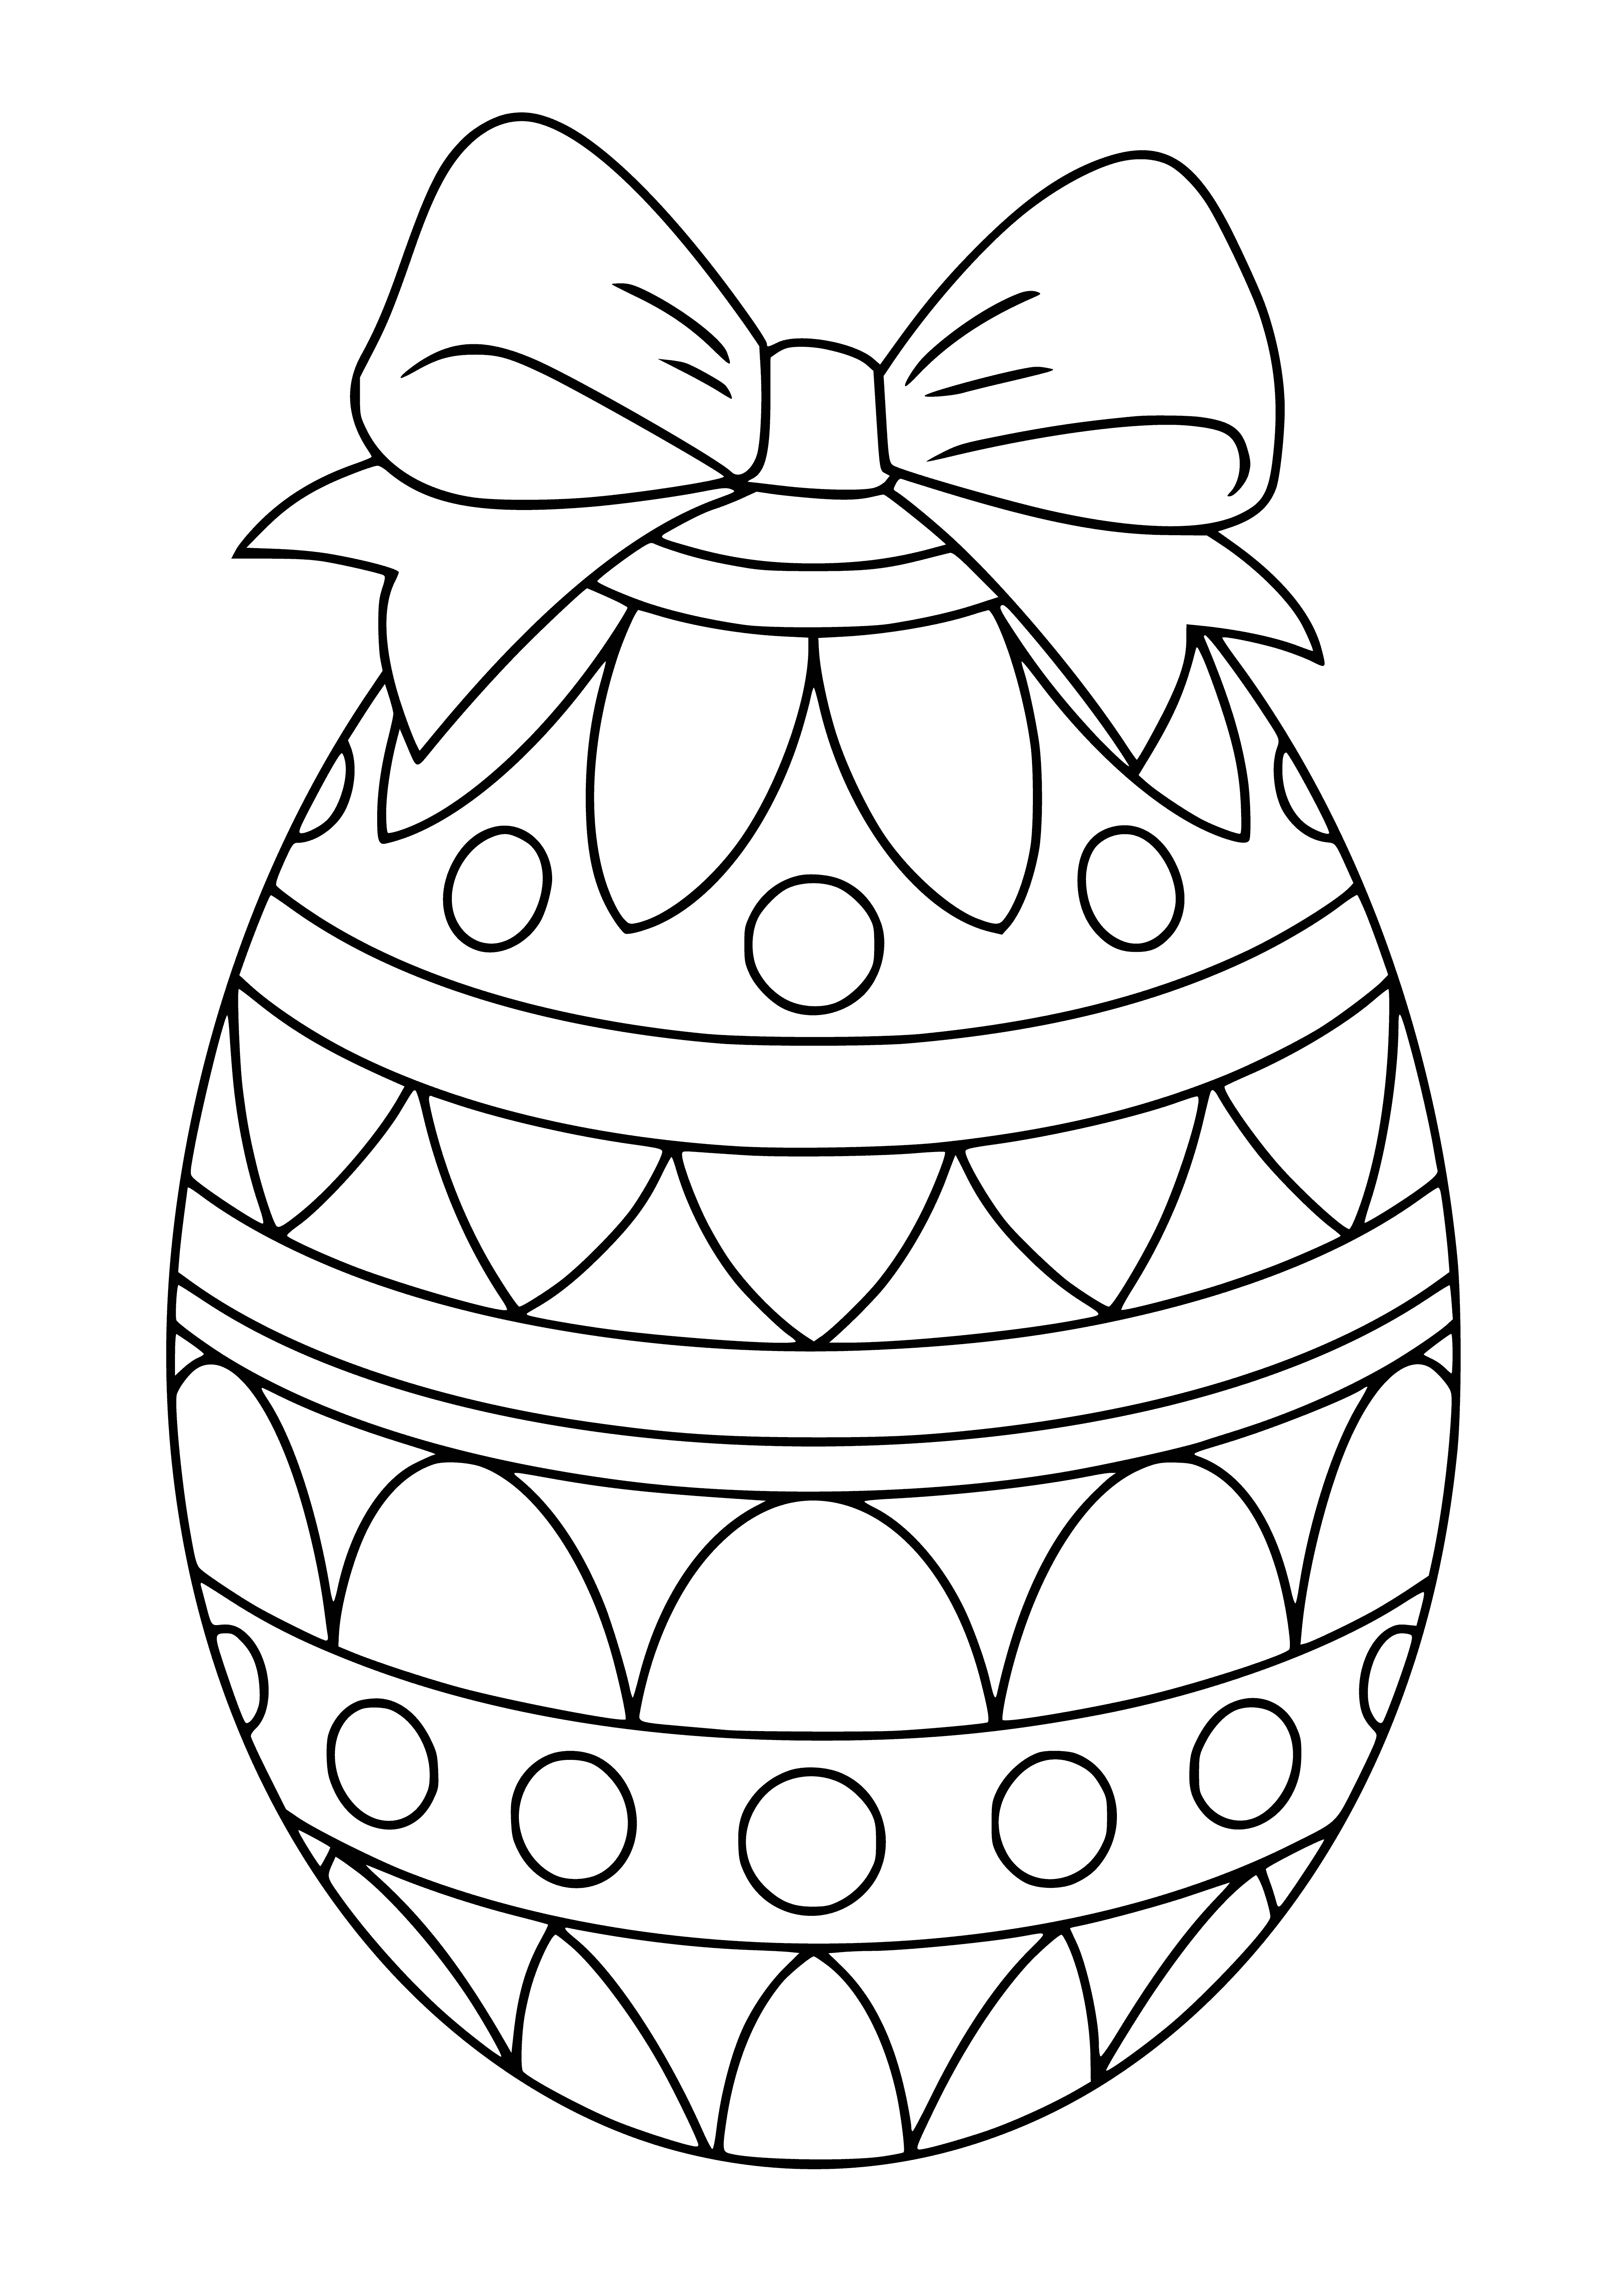 coloring page: Brown easter egg with yellow/green bow—an egg-cellent way to celebrate the season!